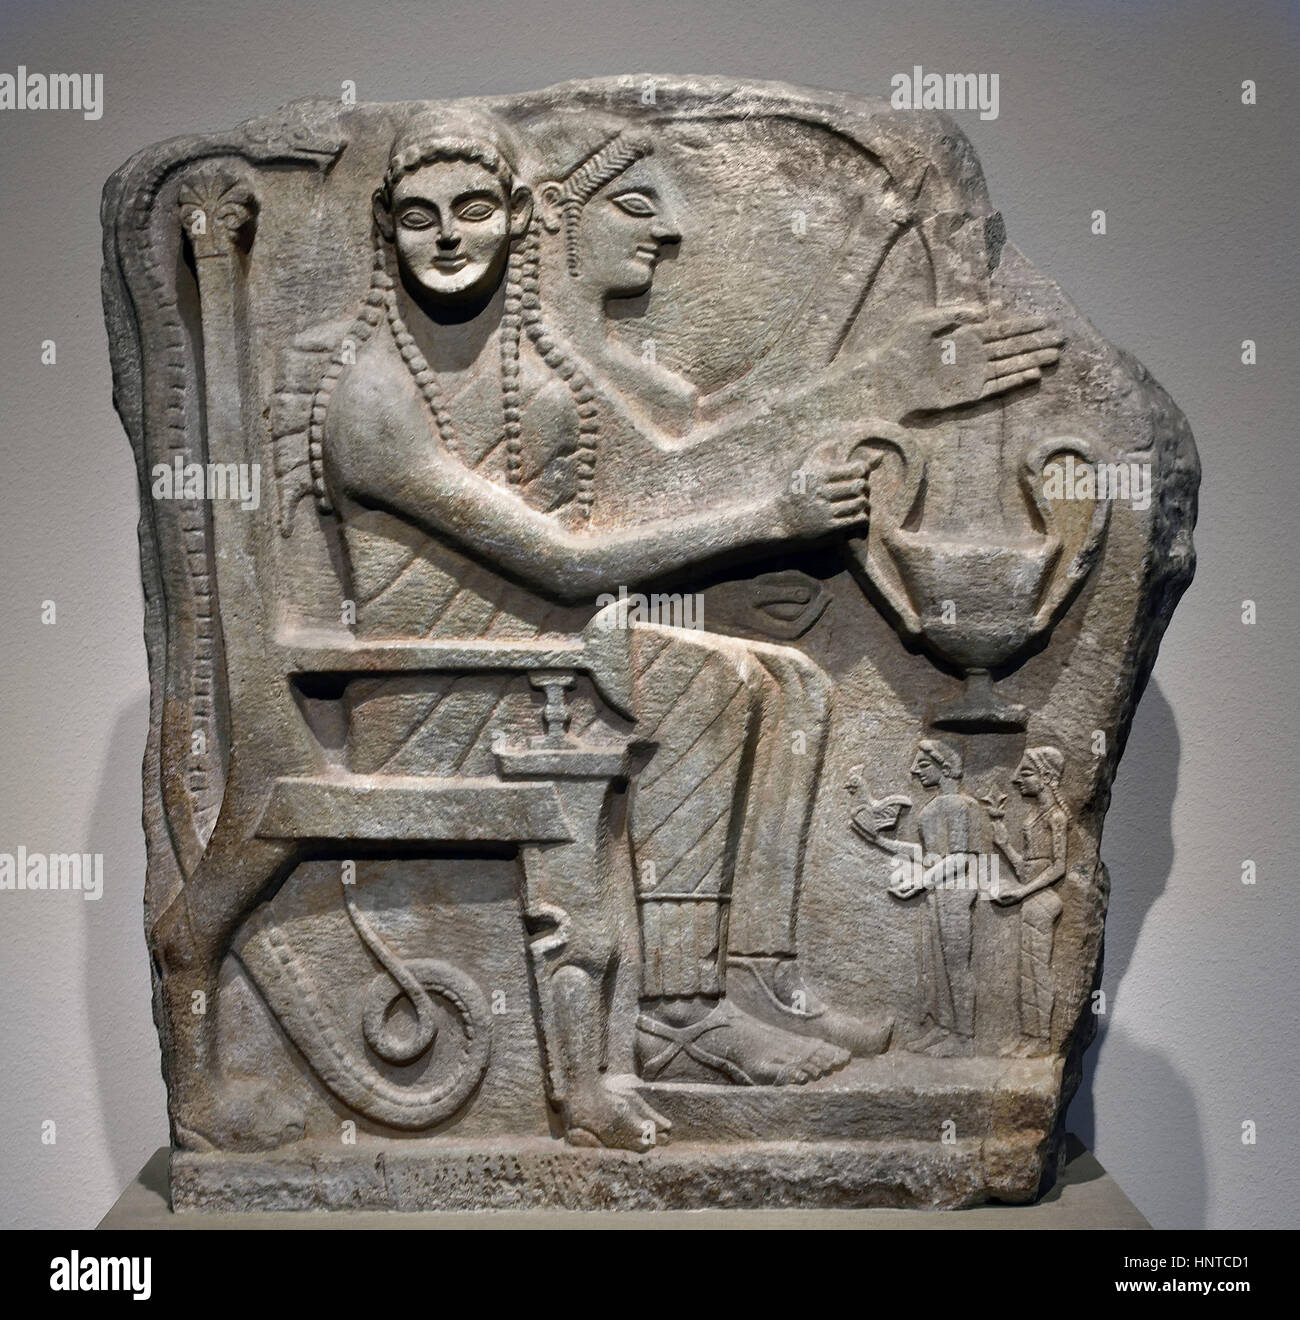 Relief with Heroes and Worshippers 540 BC  Chrysapha, near Sparta, Pikromygdalia, Greek,Greece. Stock Photo